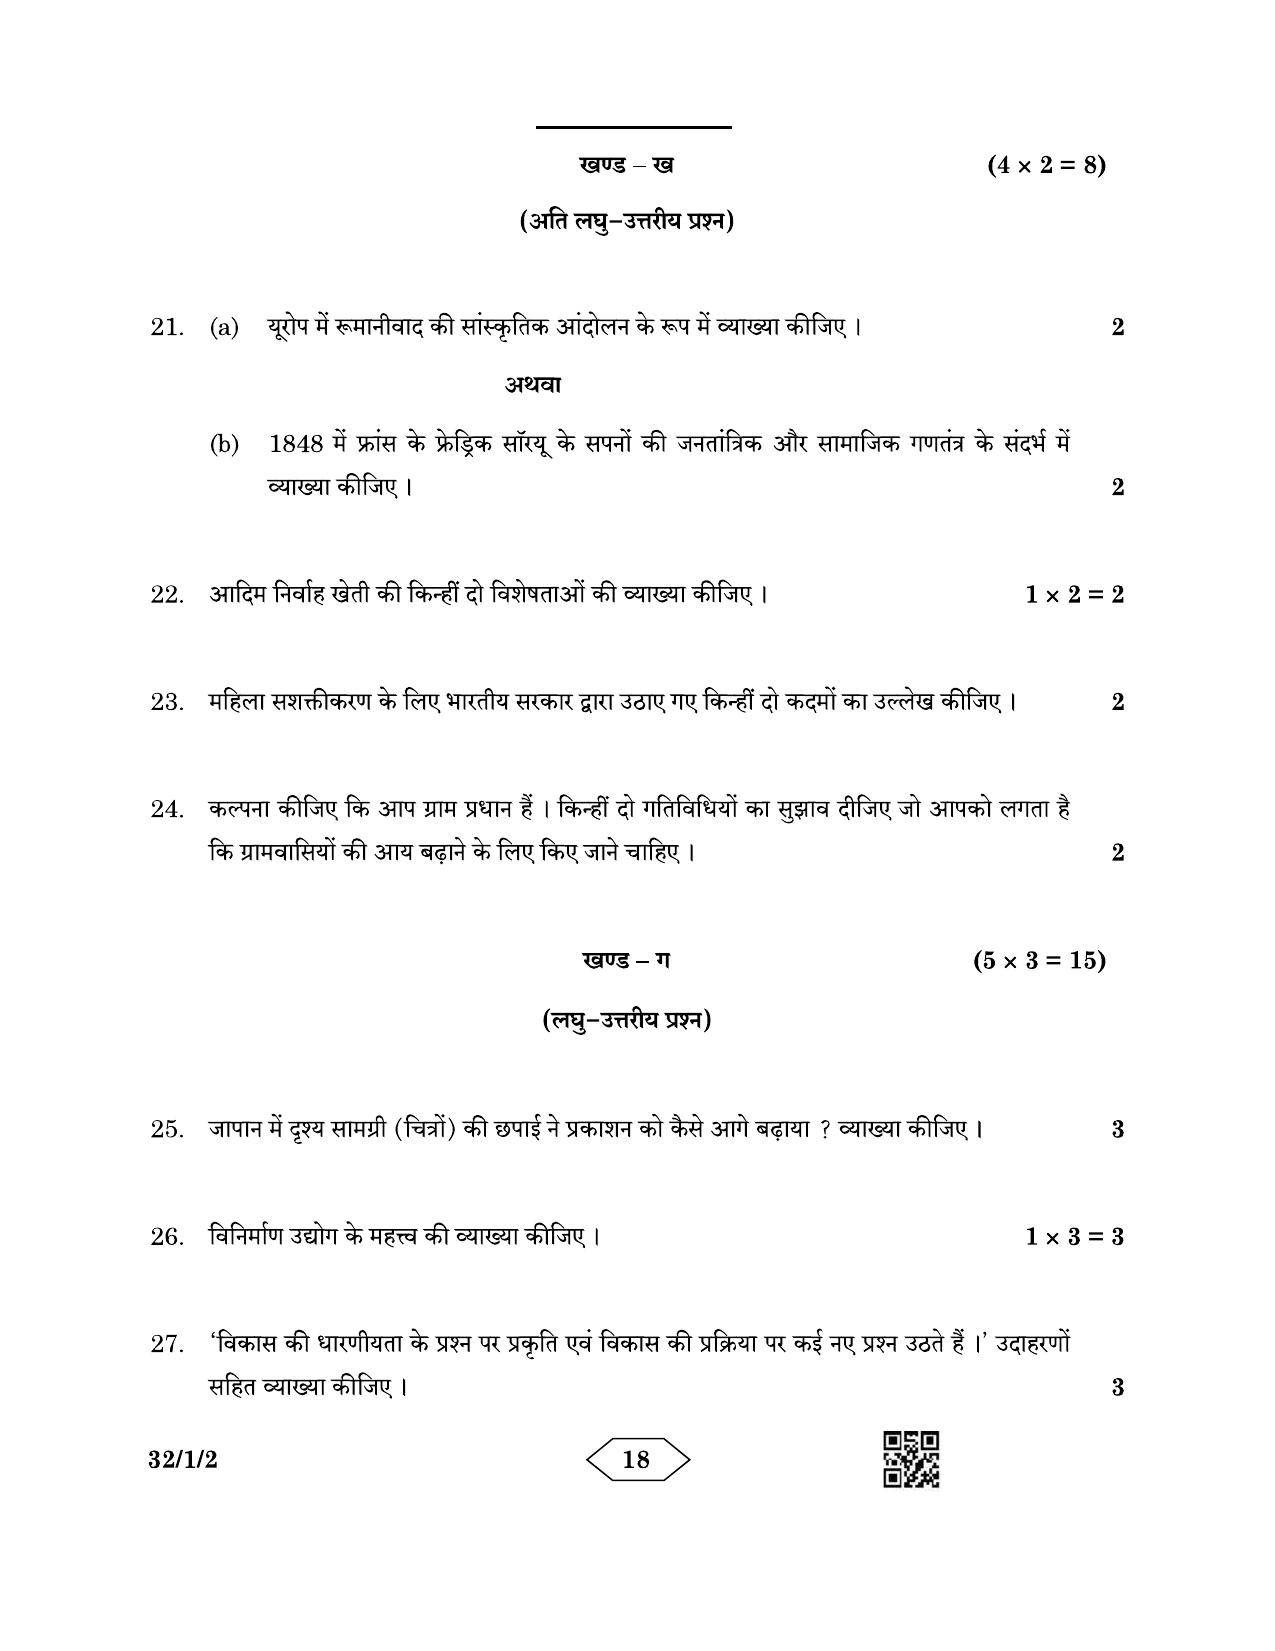 CBSE Class 10 32-1-2 Social Science 2023 Question Paper - Page 18